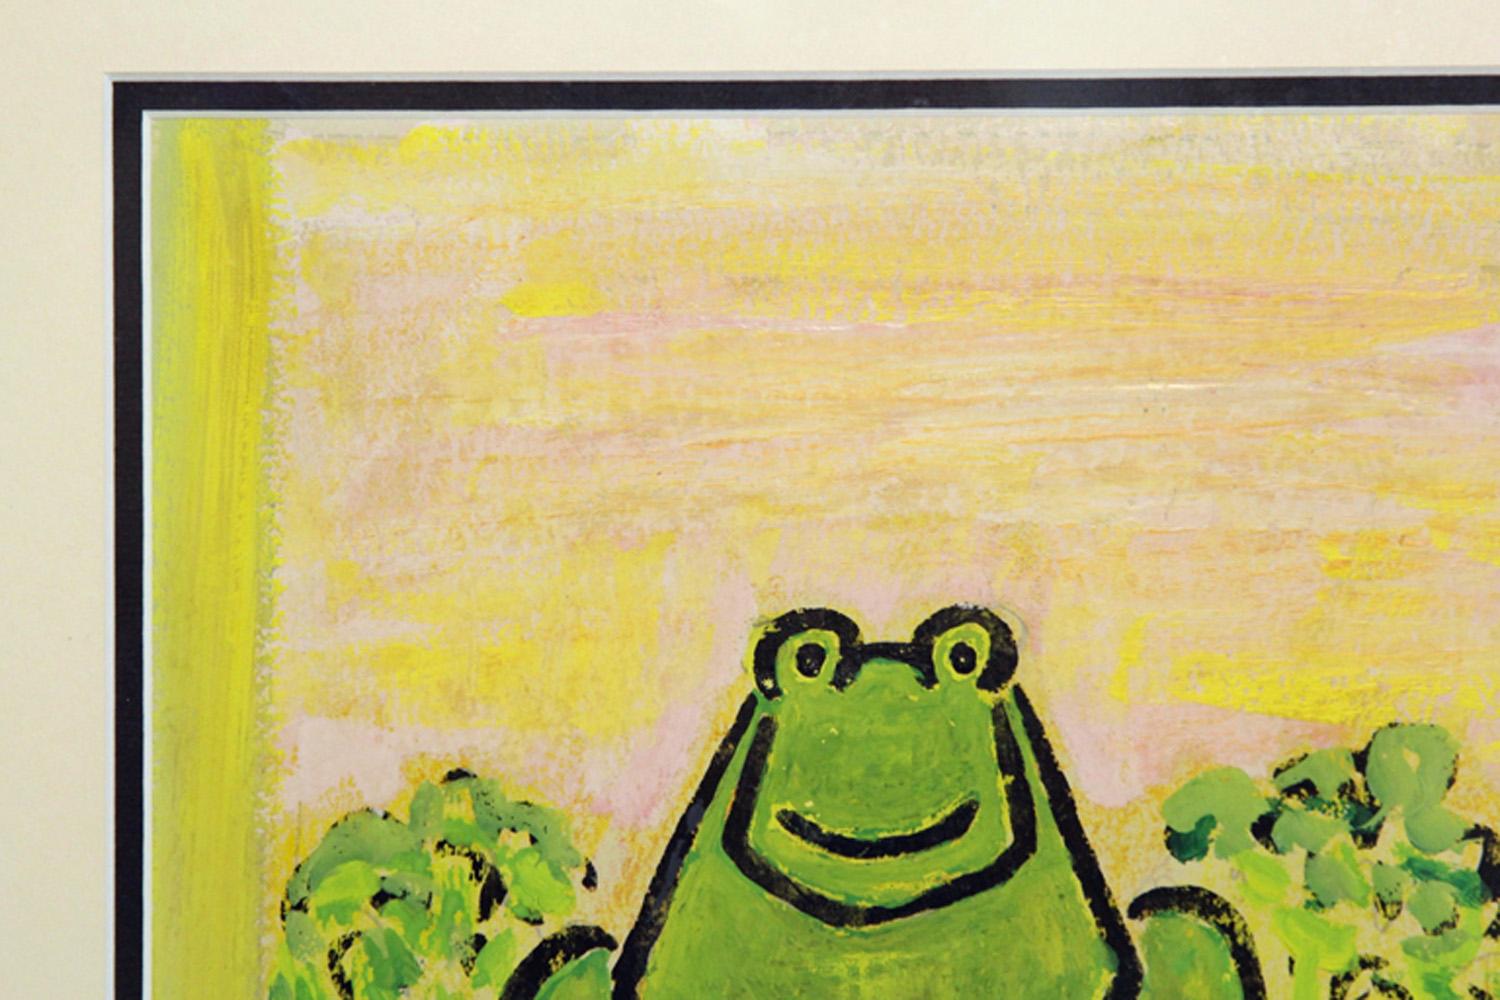 American Rare Midcentury New Yorker Cover of a Glorious Frog by Abe Birnbaum